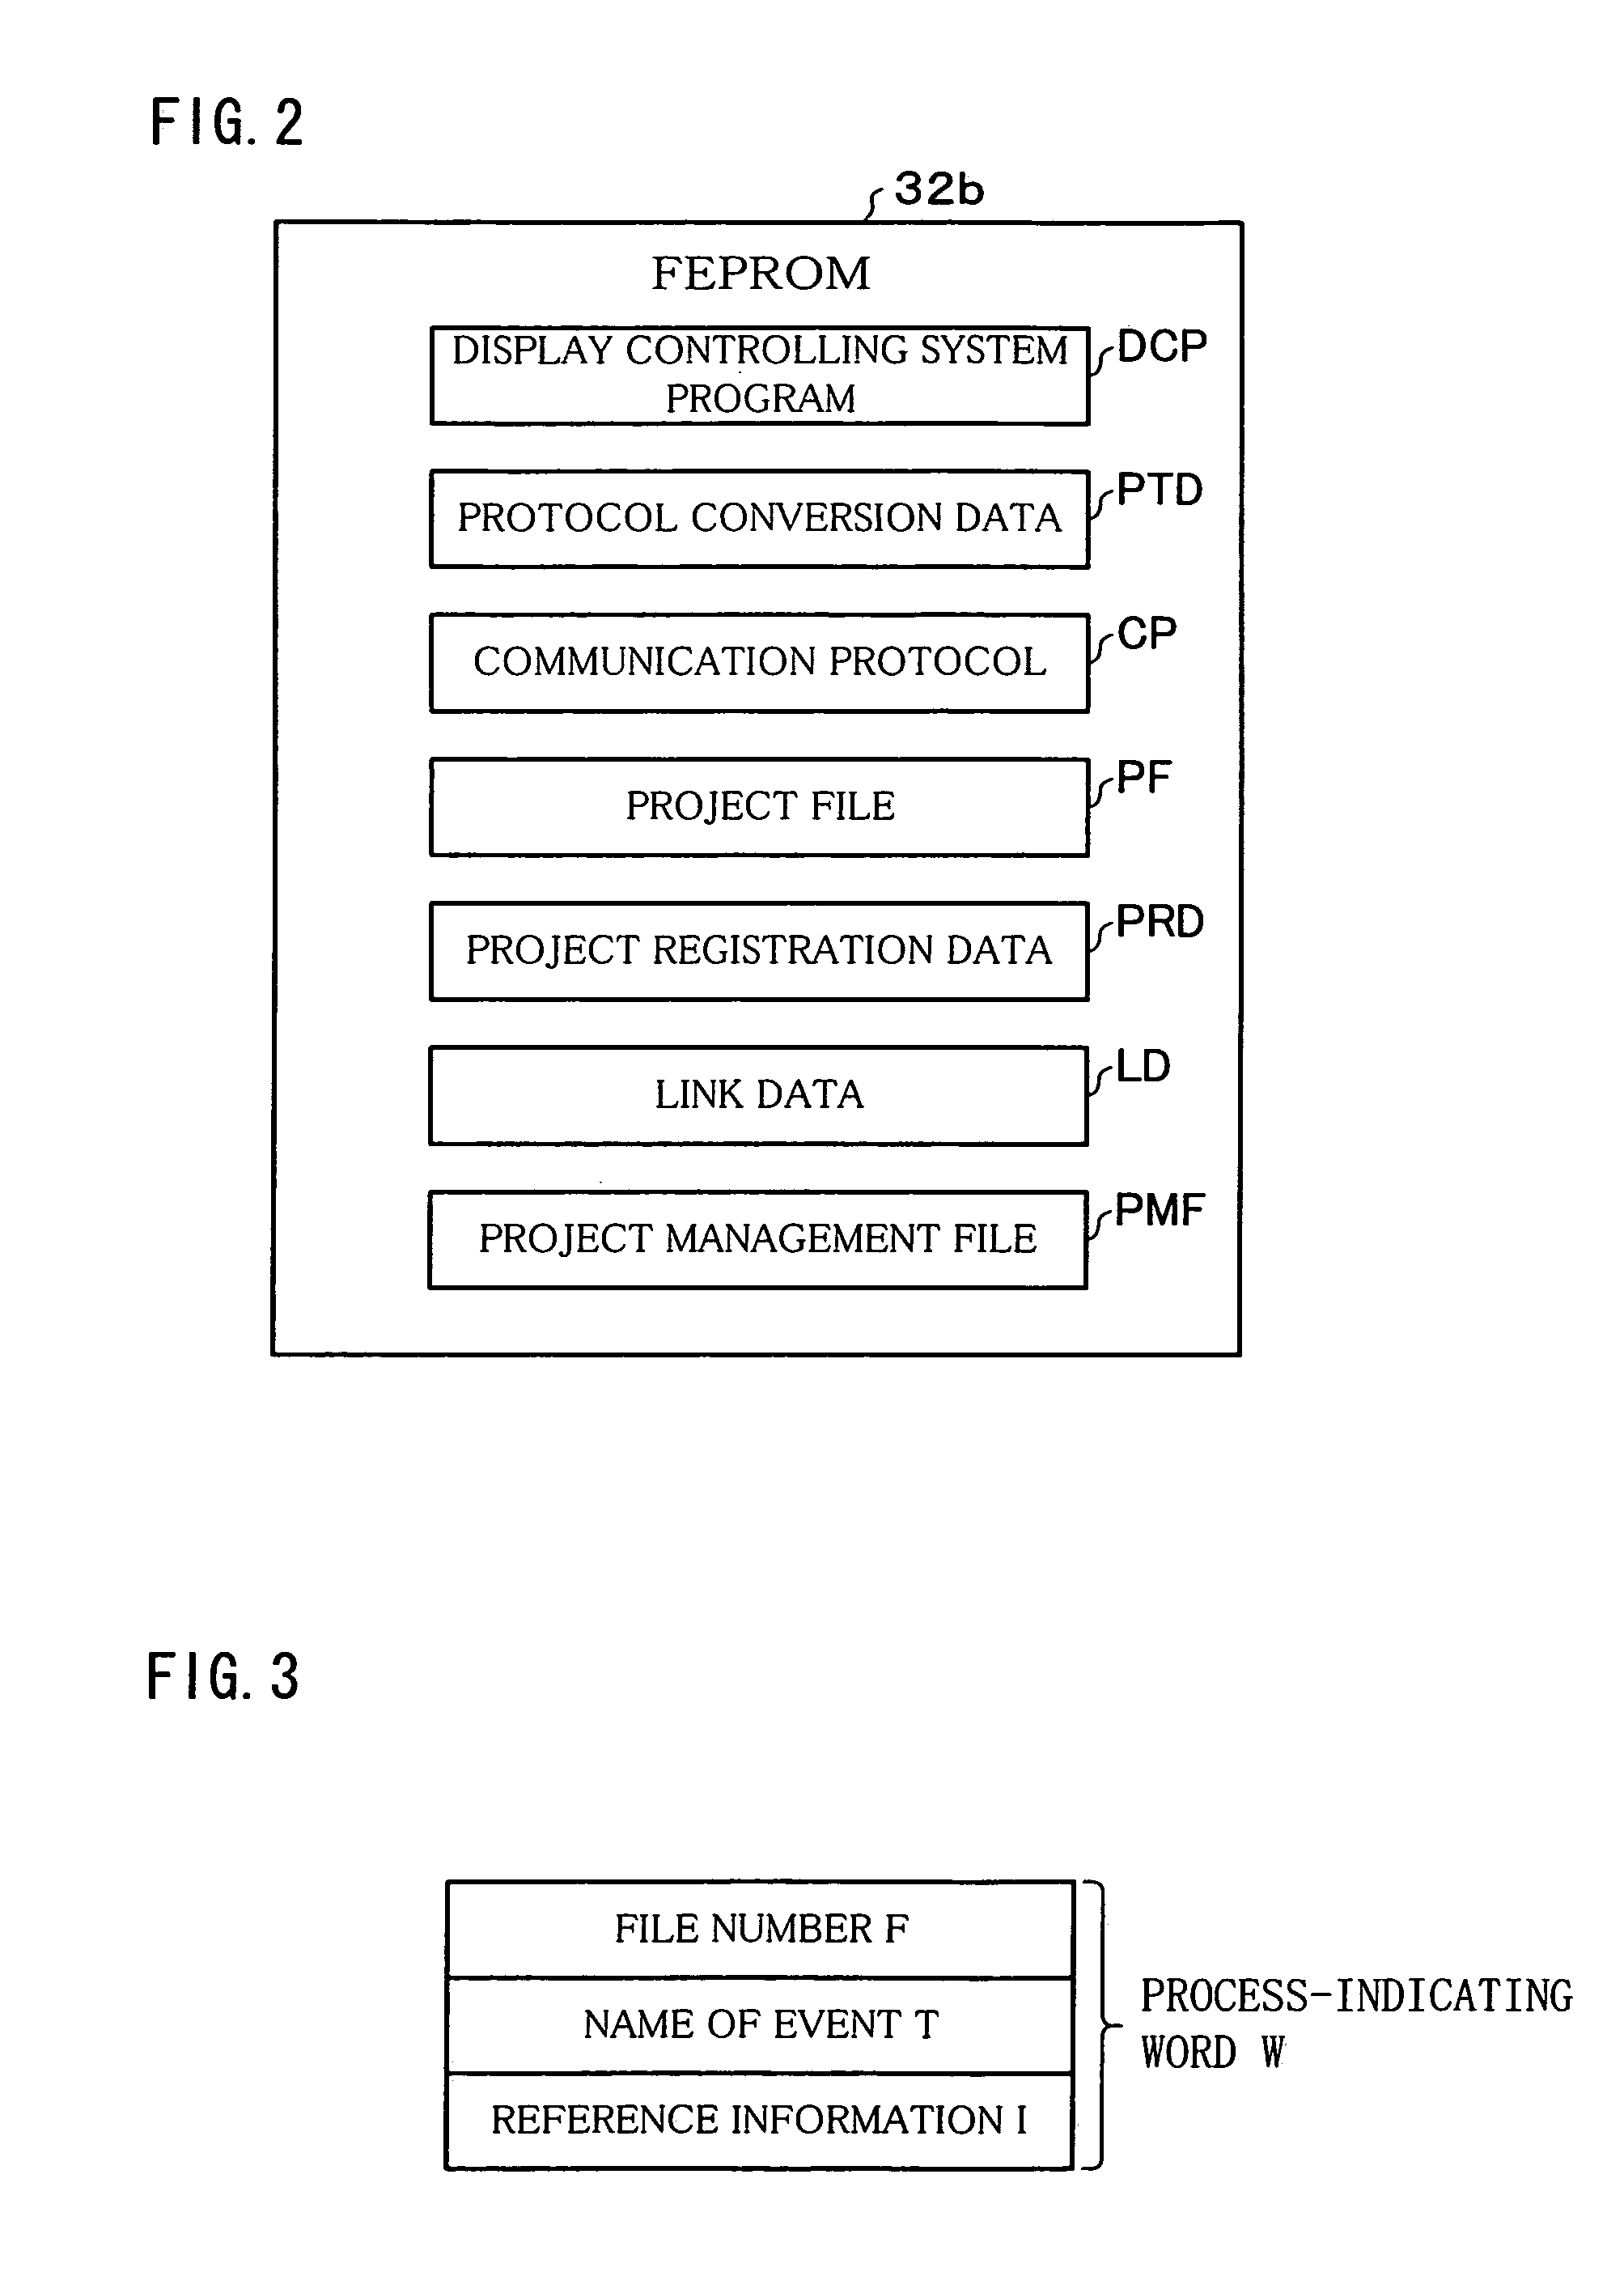 Programmable display device